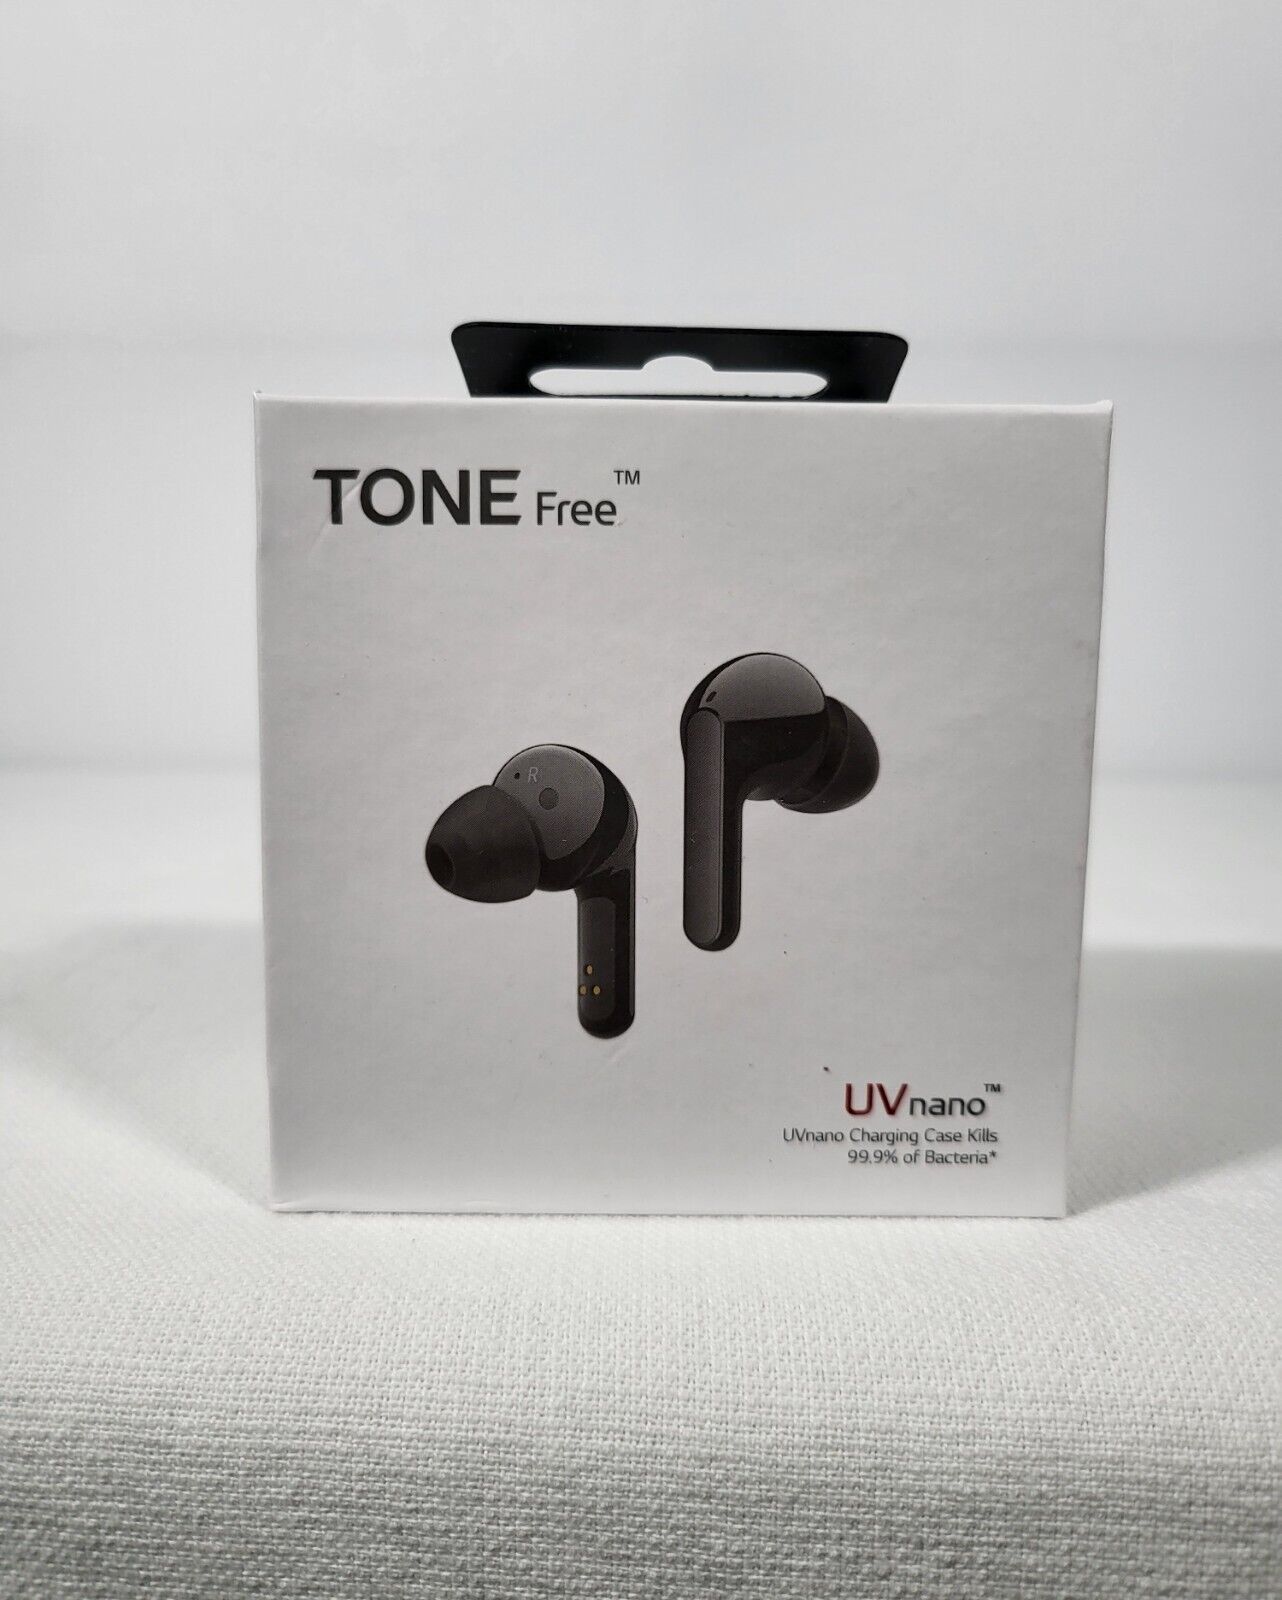 LG TONE Free FN6 True Wireless Bluetooth Earbuds with Meridian Sound, Dual Microphone, iPhone and Android Compatible, Wireless, Fast Charging, - Ricky's Garage